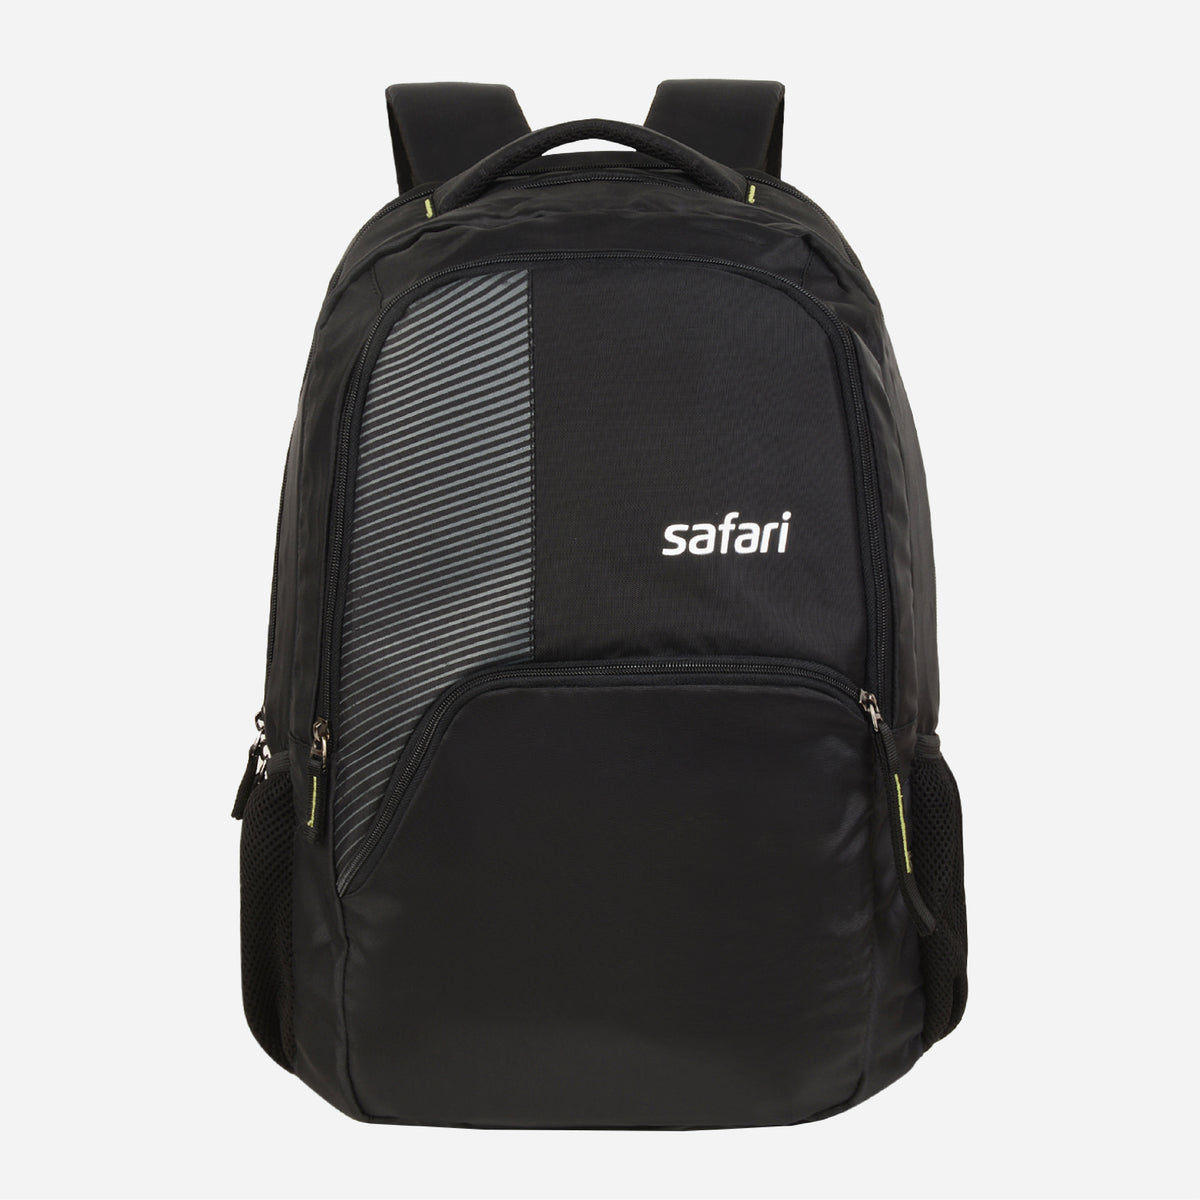 Safari Helix 30L Black Laptop Backpack with Raincover